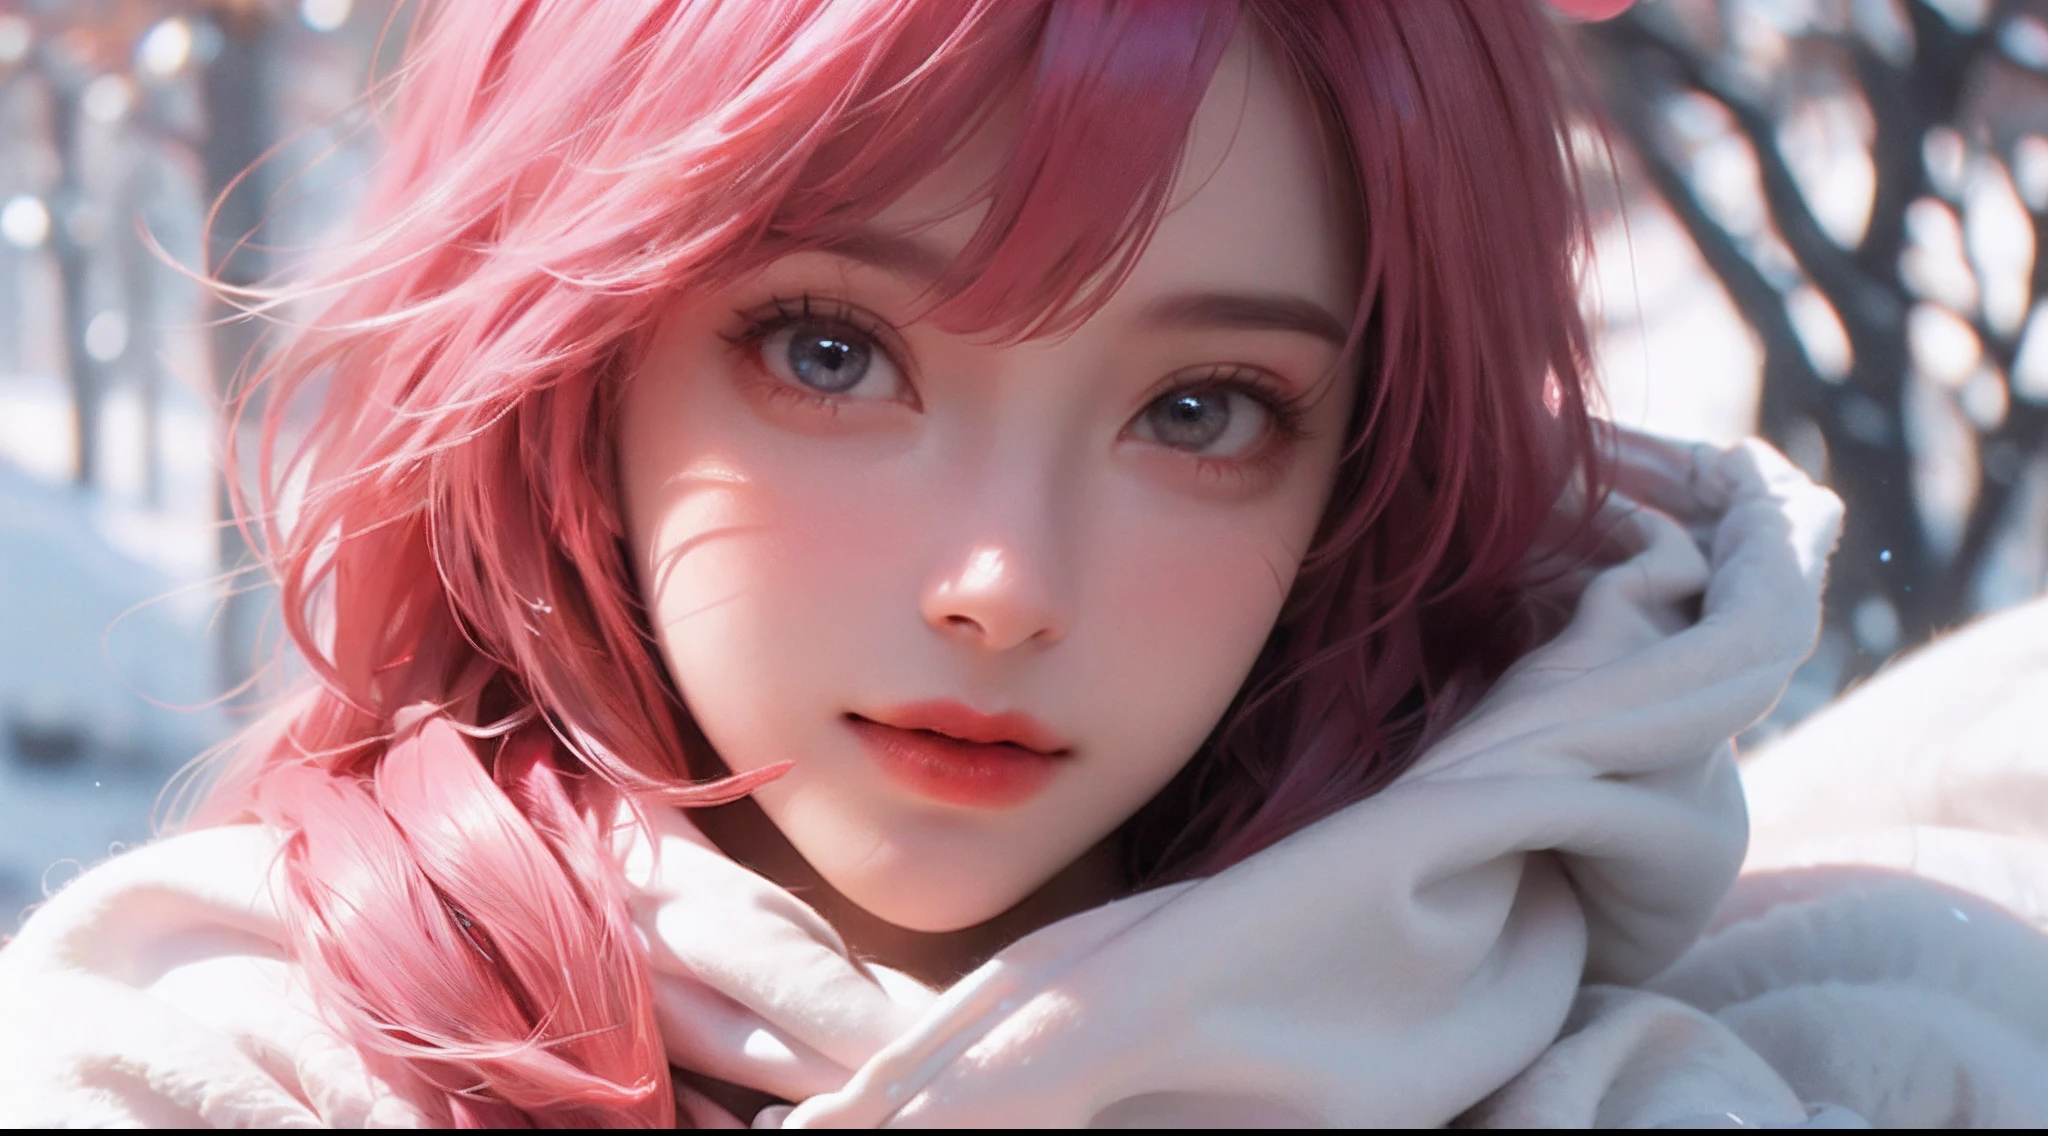 （closeup cleavage：1.4），
（RAW photogr：1.2），（realisticlying：1.4），（tmasterpiece：1.3），（best qualtiy：1.4），dream magical，（Detailed eyes），（detailedfacialfeatures），（detailed clothes features），skin tight，（shiny skins），（Slender girl），1girll，（（full bodyesbian）），solo，adolable，smlie，（mediuml breasts），By bangs，hair straight，long whitr hair，Pink hair，eBlue eyes，Red crystal pendant， Long blue scarf，White long wool coat，snowfield